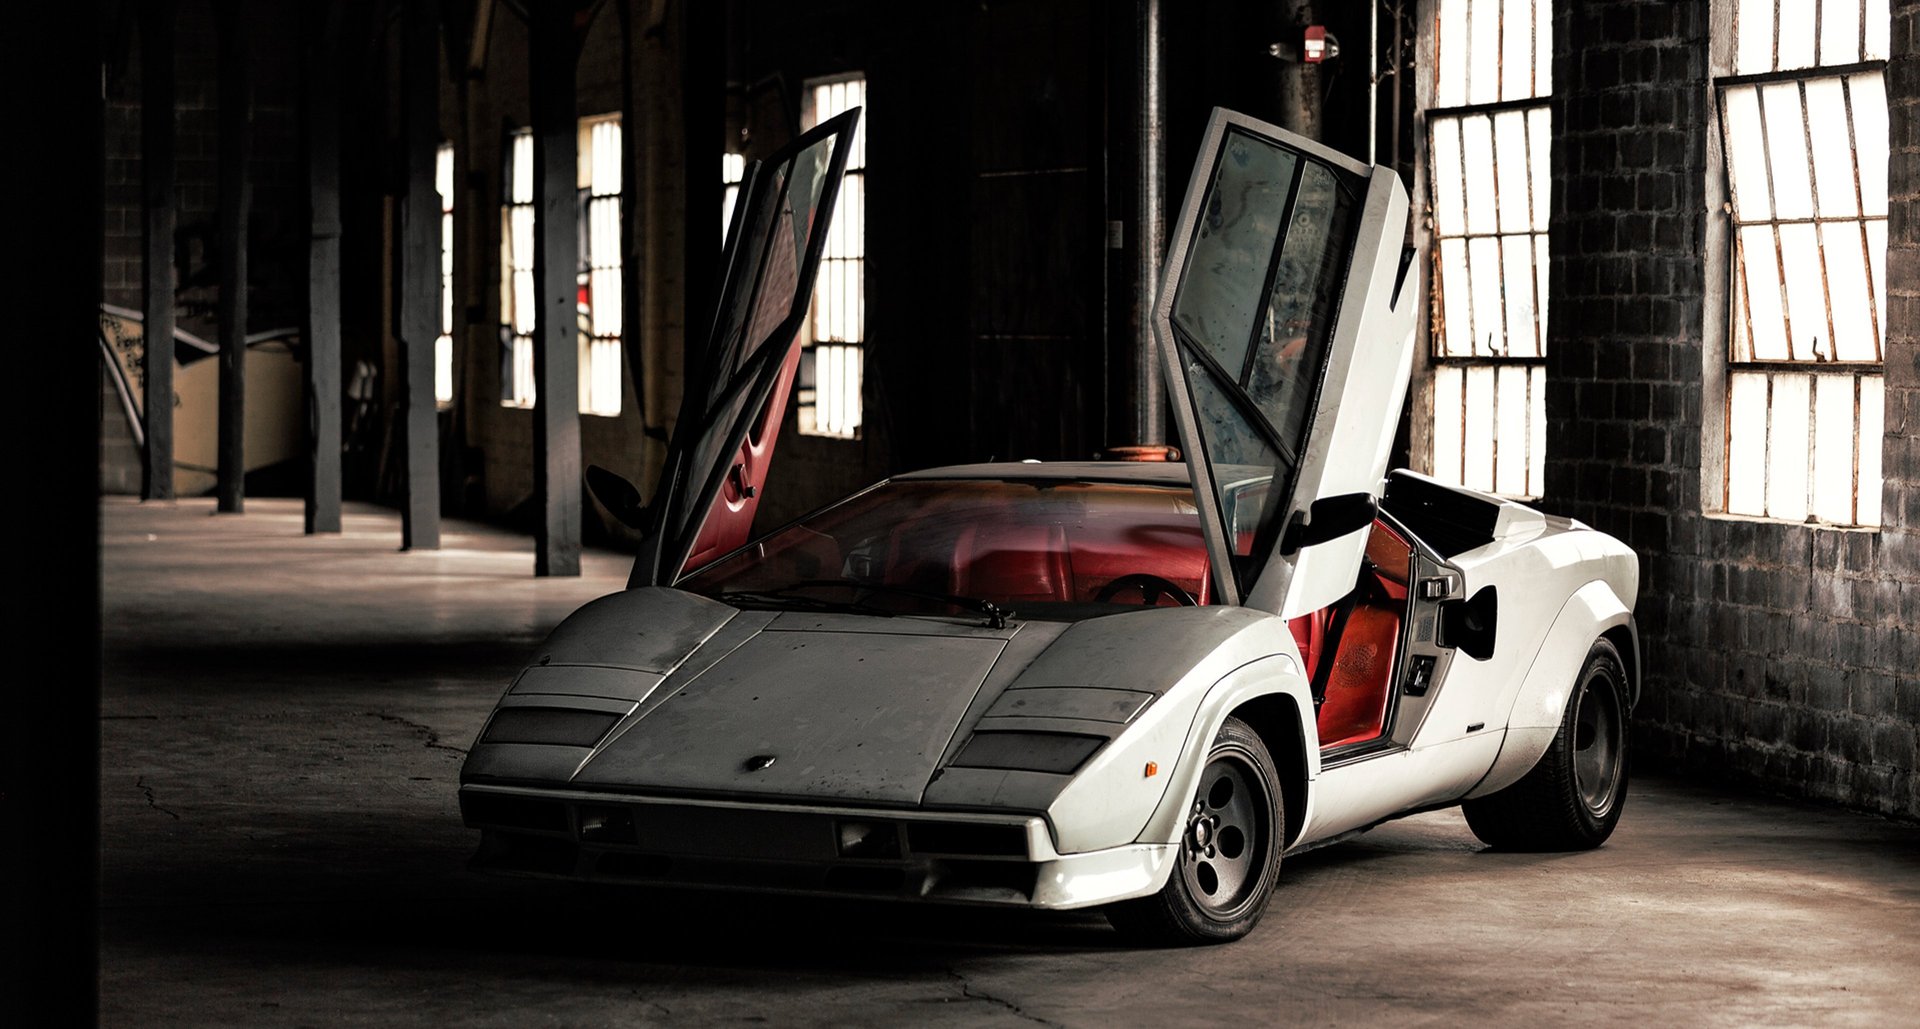 Is this ex-rockstar Lamborghini Countach the barn find of the year